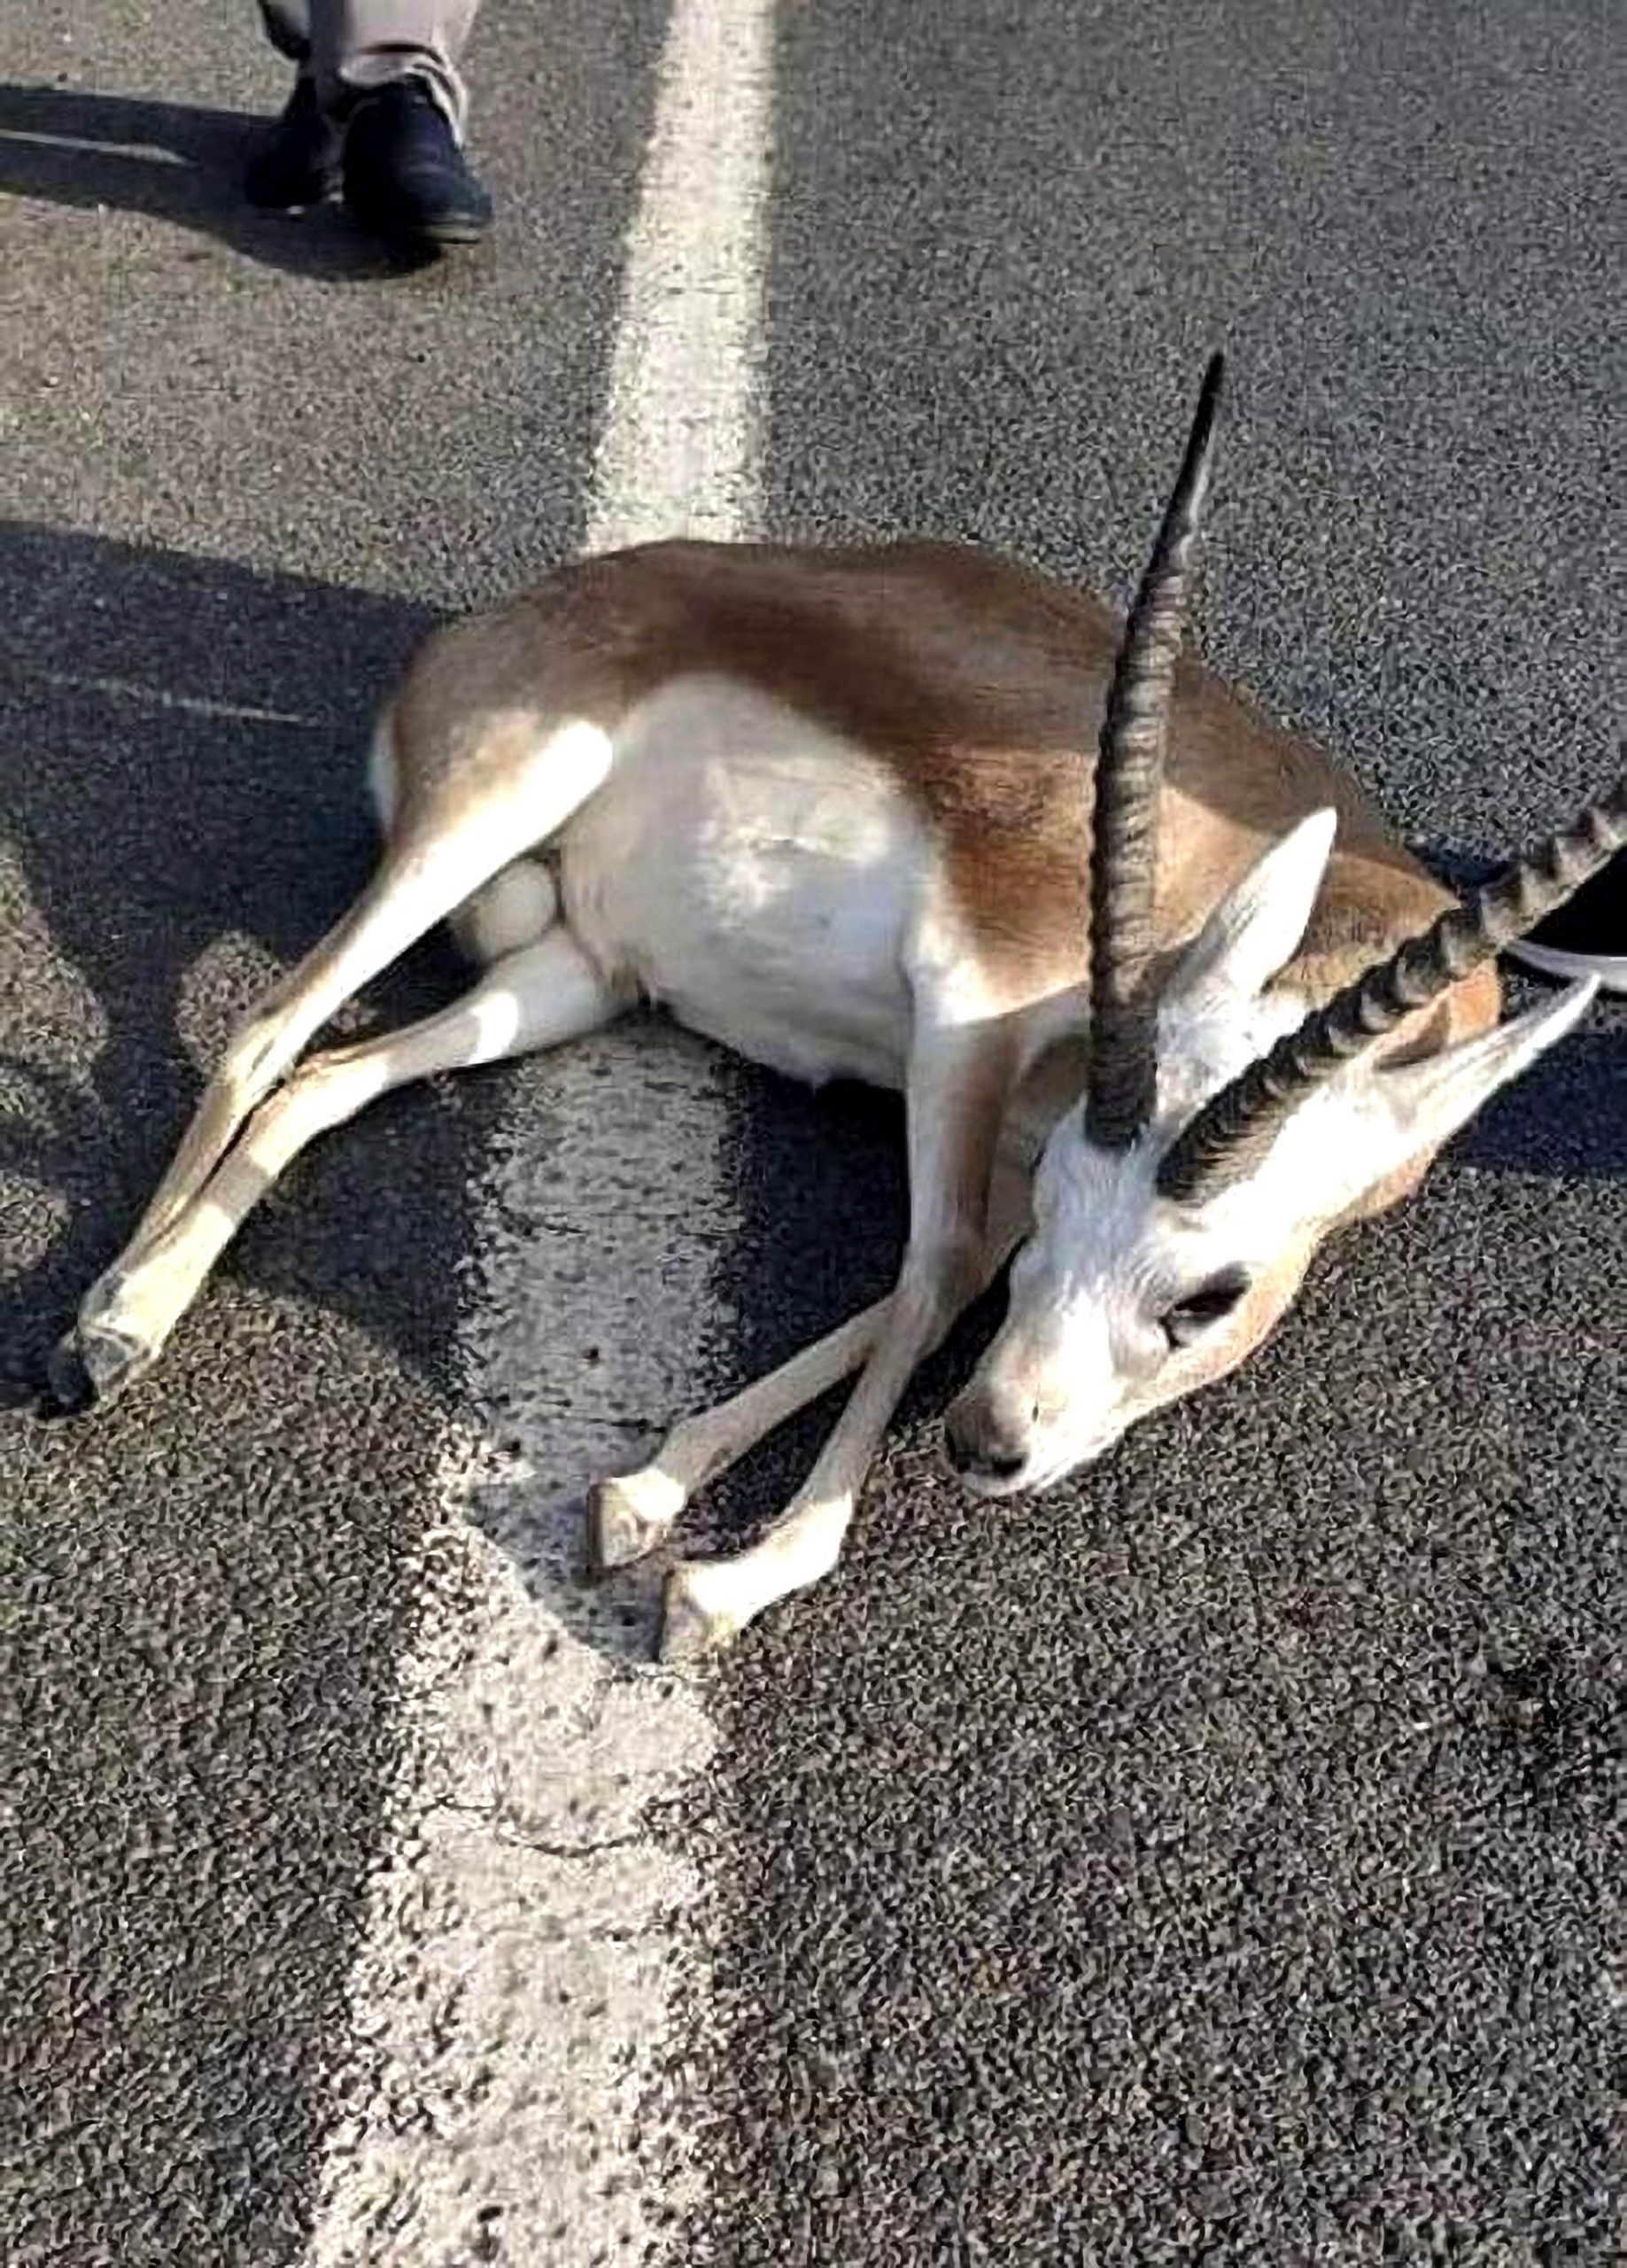 Read more about the article Injured Gazelle Feared Eaten After Good Samaritan Offered To Take It To Vets